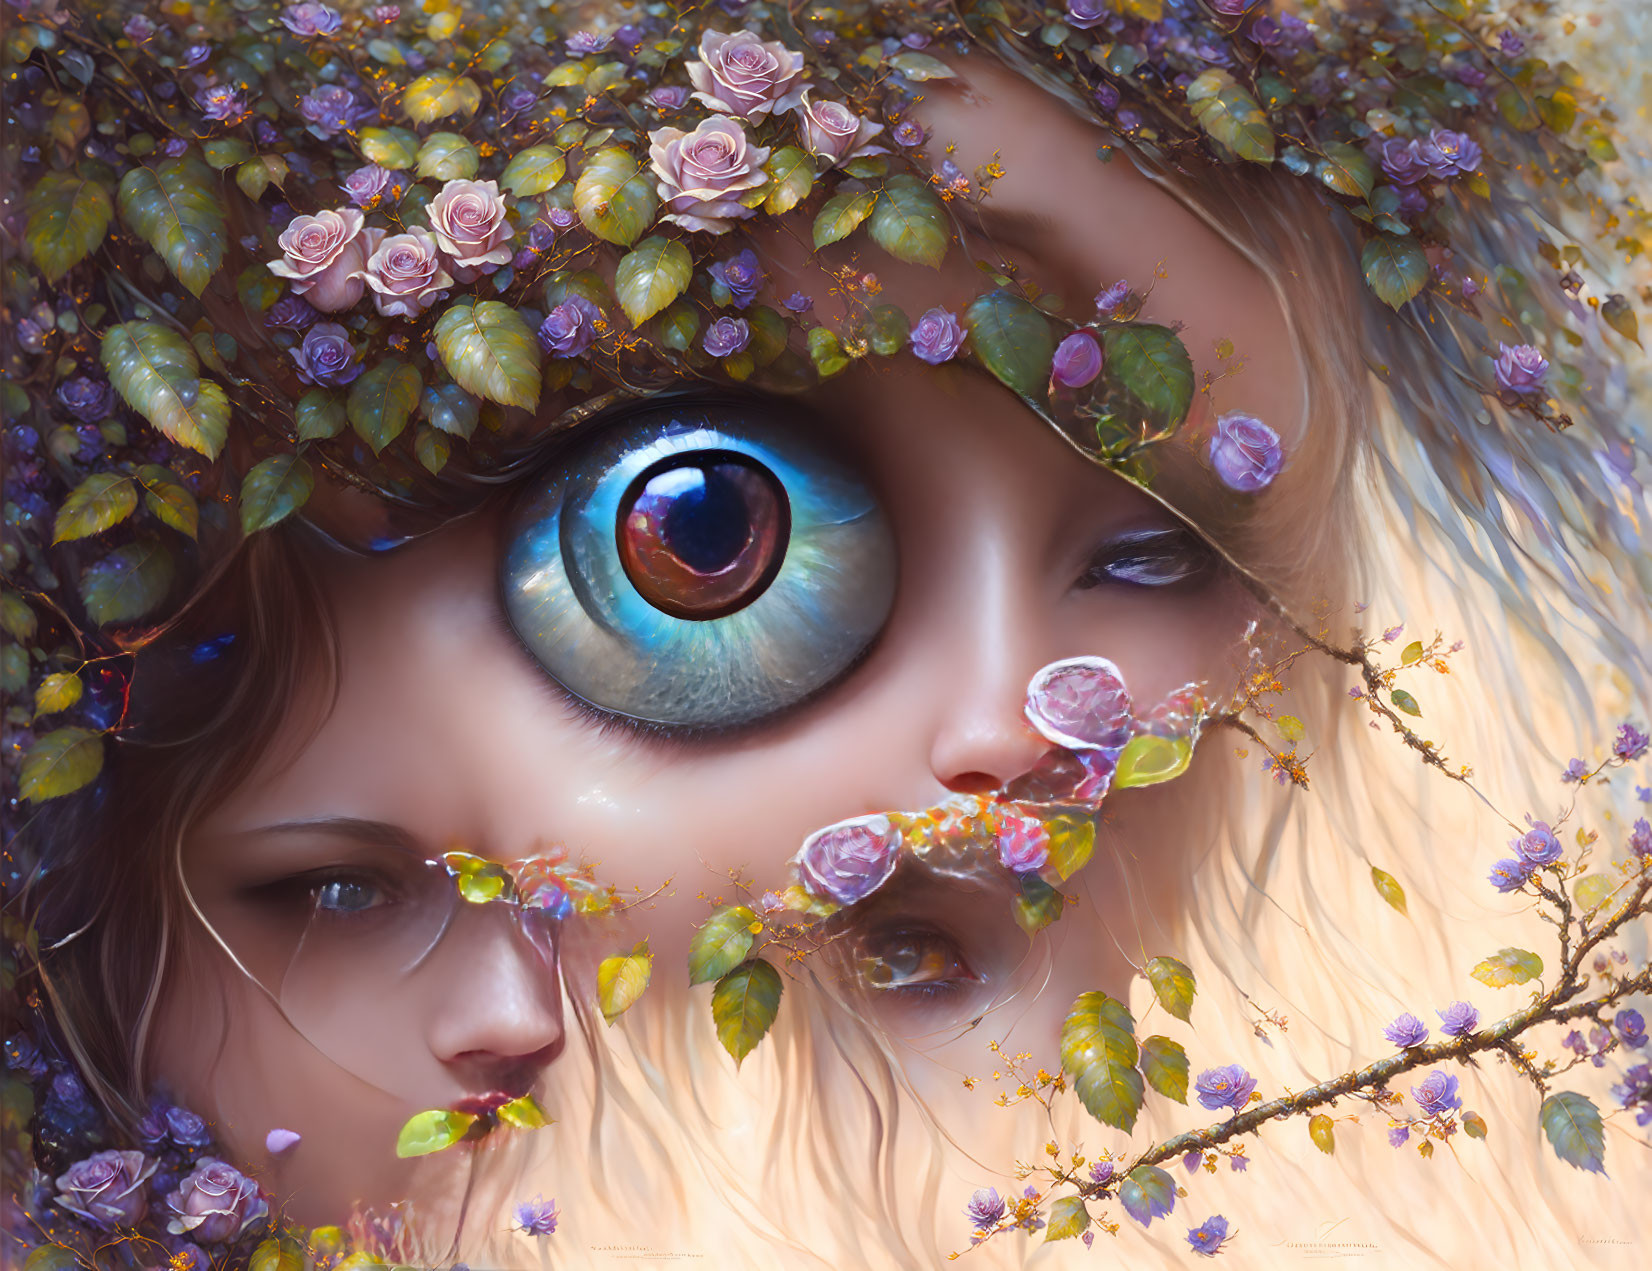 Surreal close-up digital artwork of woman's face with enlarged eye and floral adornments